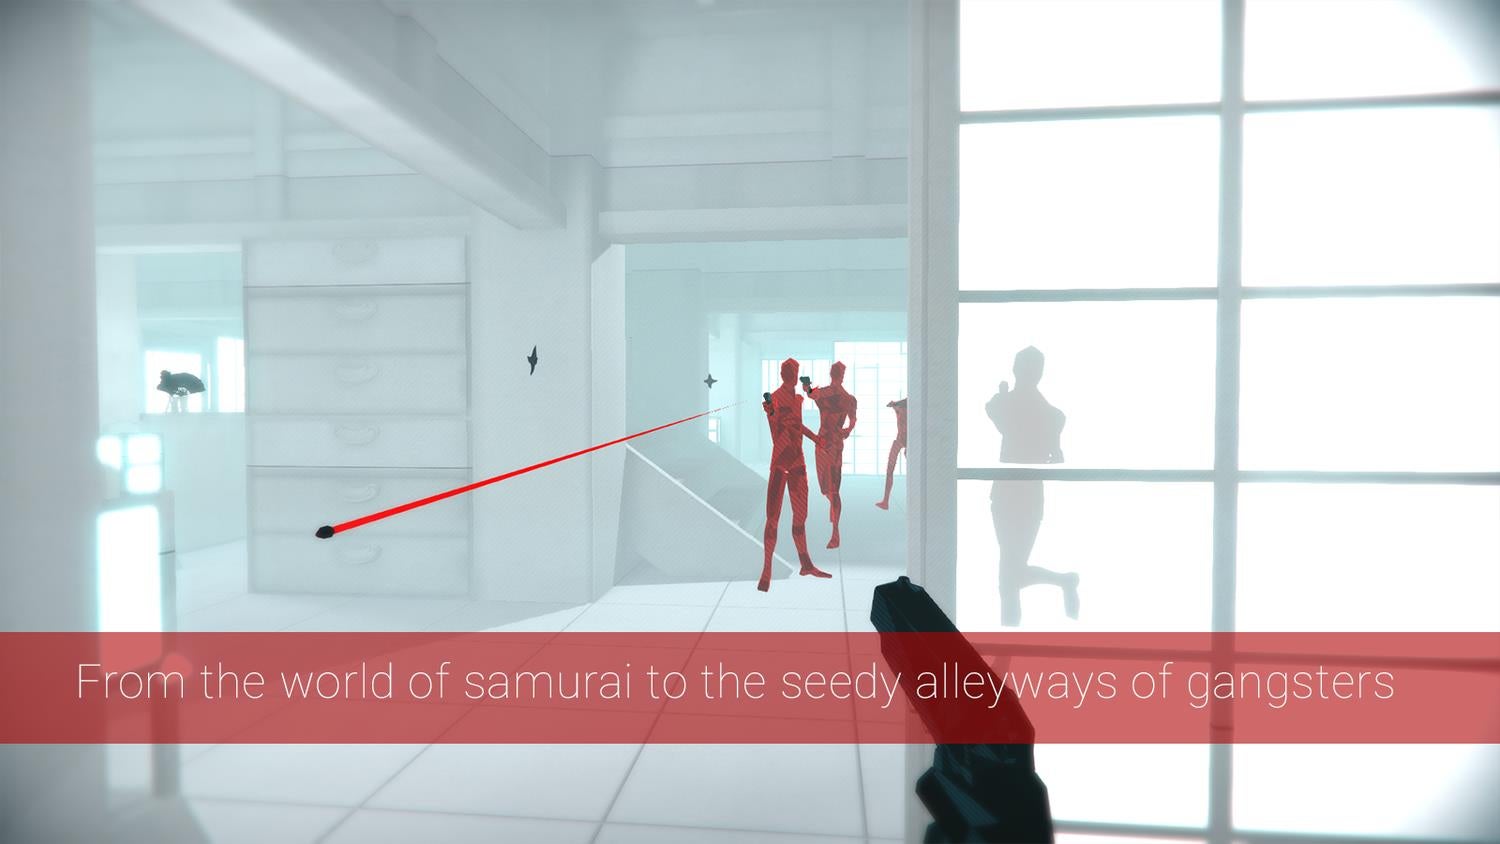 Image for Superhot JP is a Japanese-based off-shoot, developed in Japan